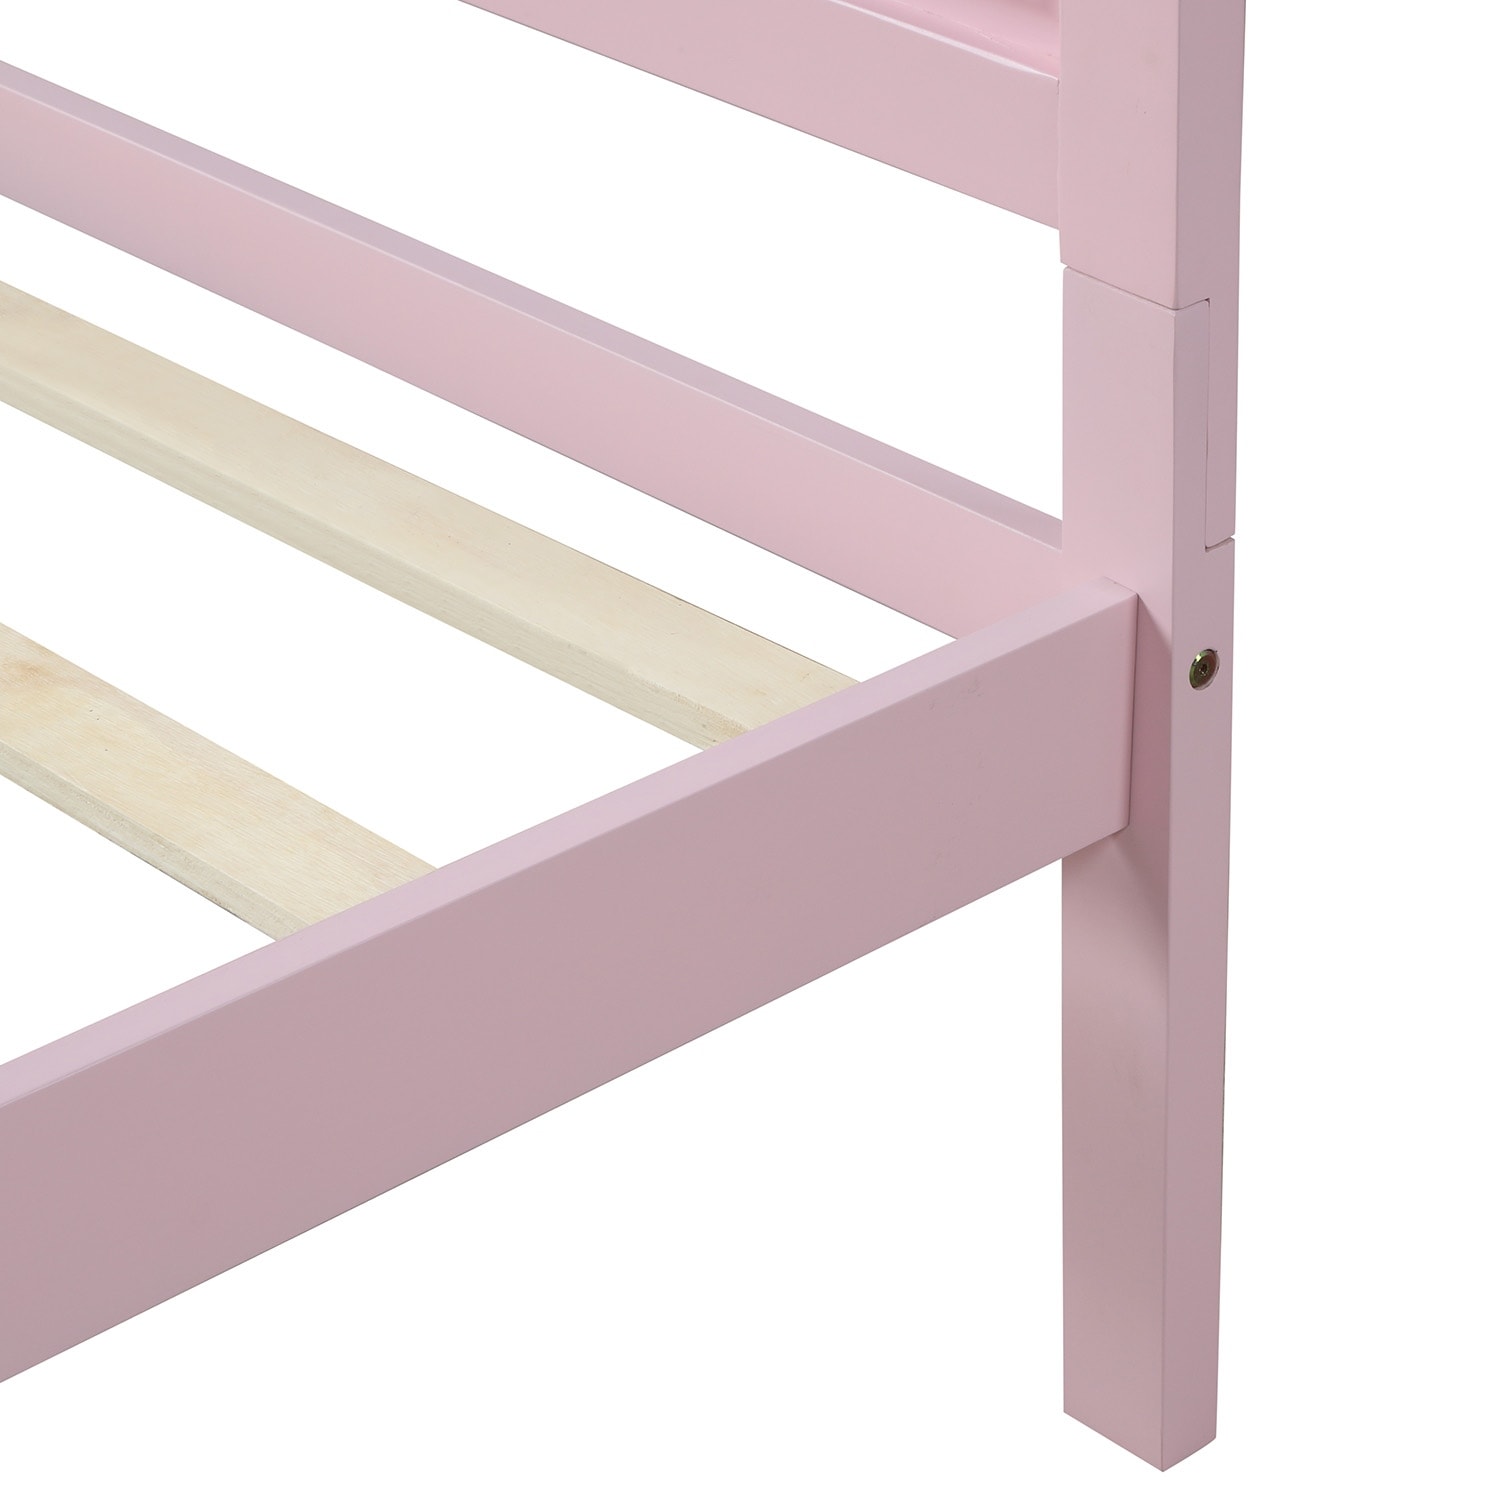 Elegant & Simple Twin Size Upholstered Platform Bed House Bed Kids Bed Sleigh Bed with Headboard/Footboard/Wood Slat Support